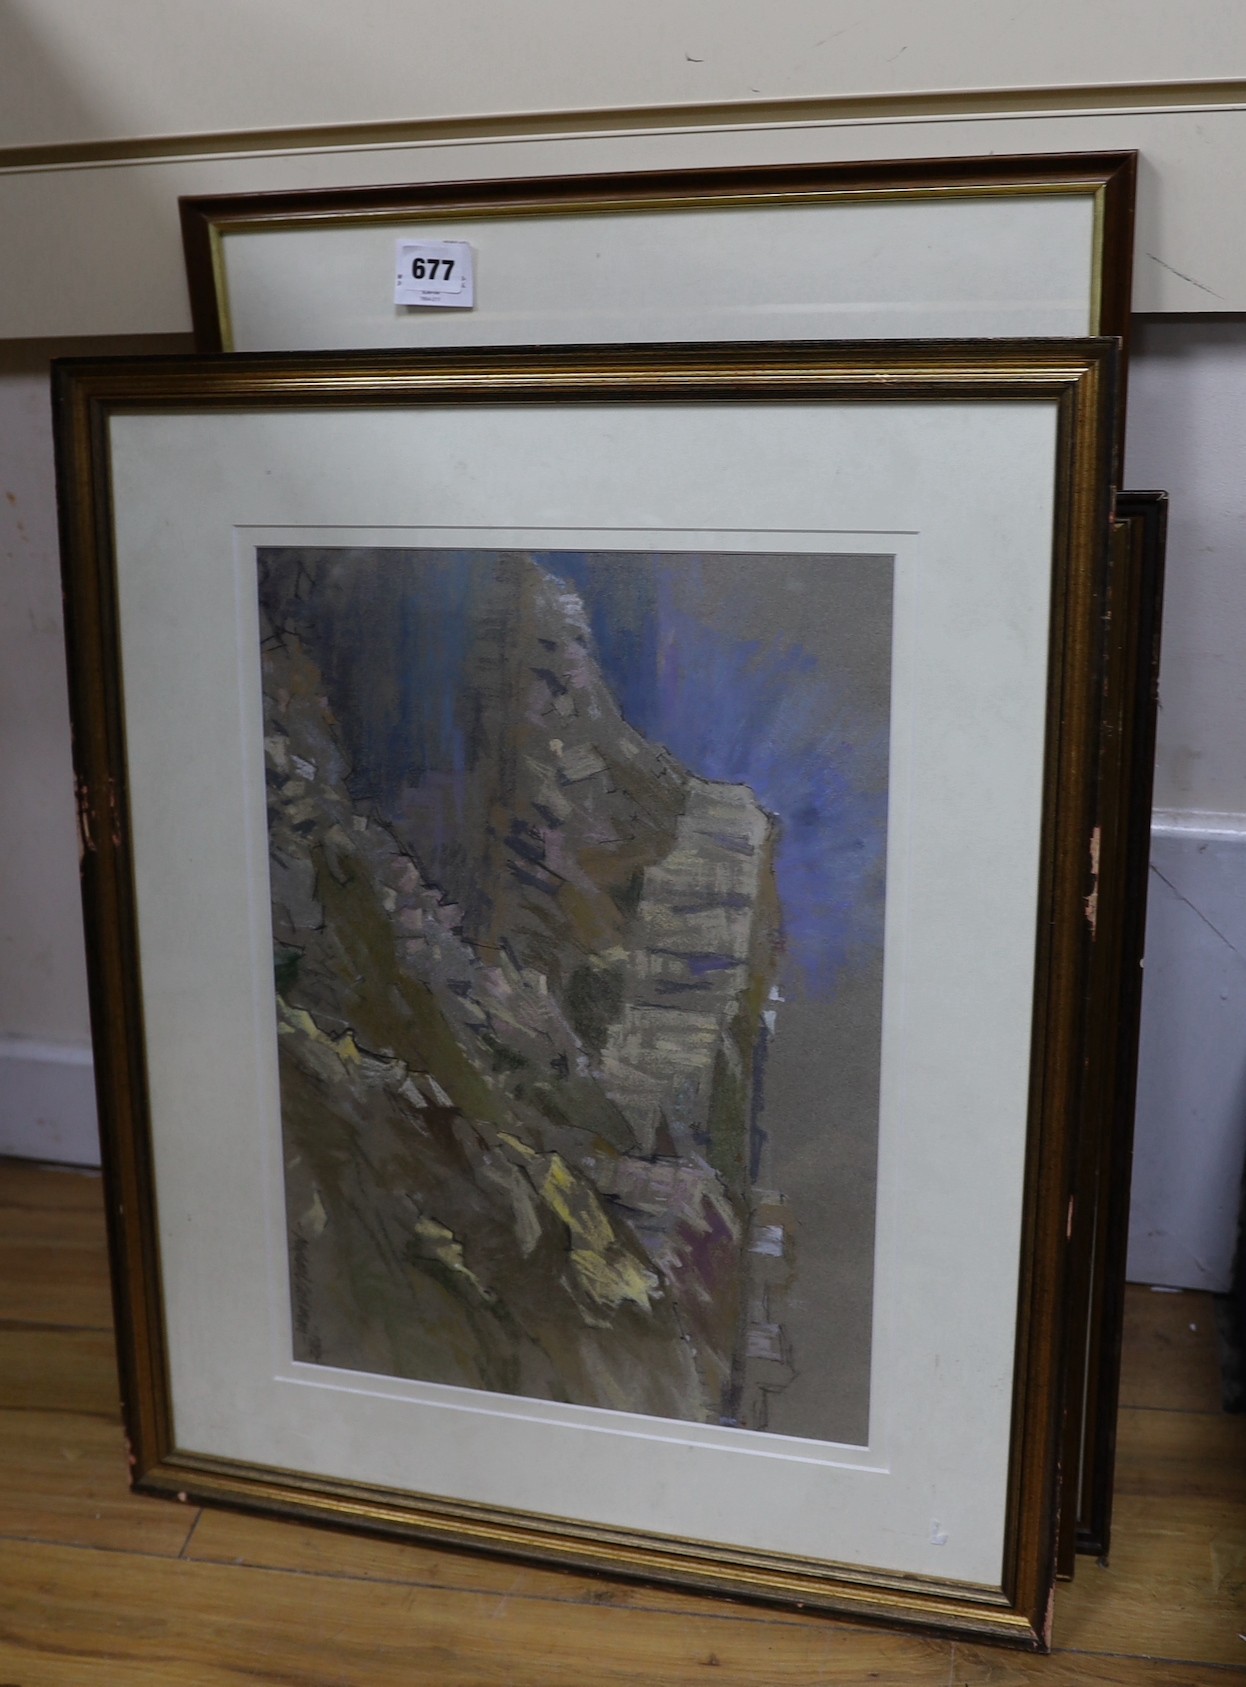 Michael Cadman (1920-2010), pastel, Coastal cliffs, signed and dated 1982, 30 x 43cm, together with E. W. Sharland (fl.1911-1925), four colour etchings, Views of Rouen Cathedral and John Iouv House, and two other prints,